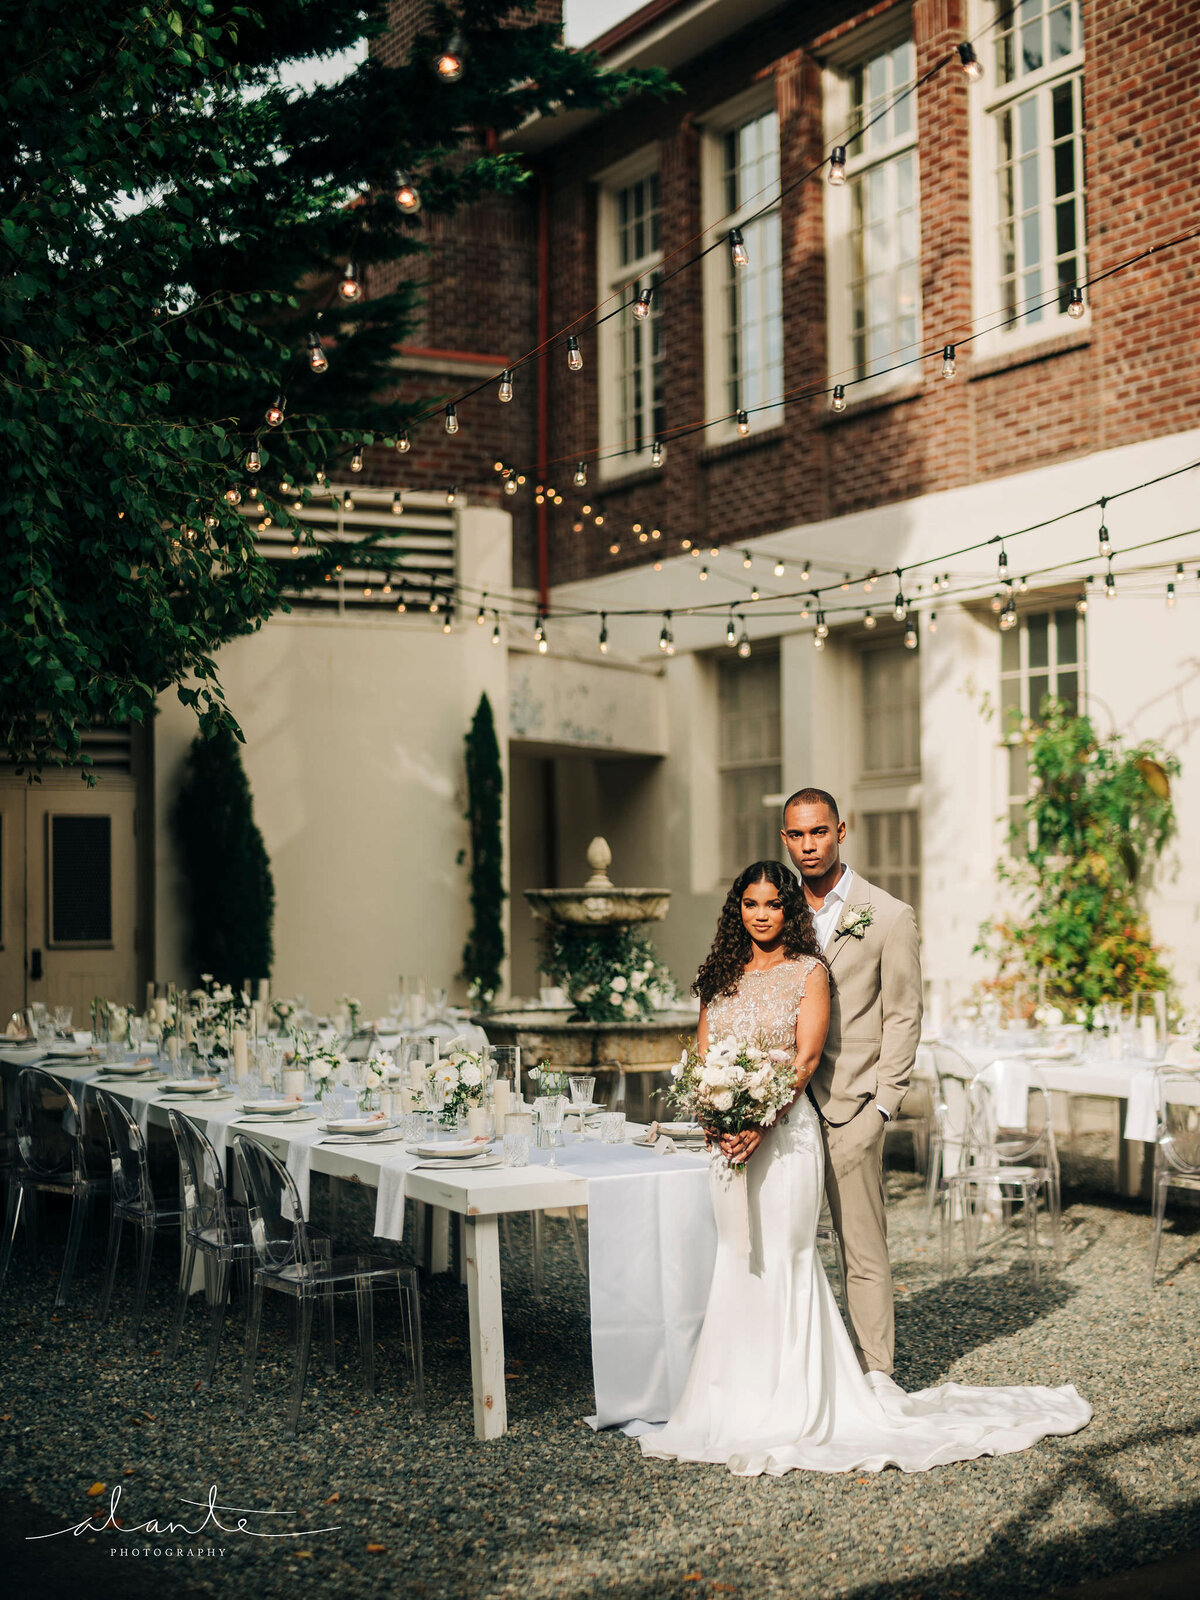 Modern Chateau Wedding at The Hall at Fauntleroy - 17